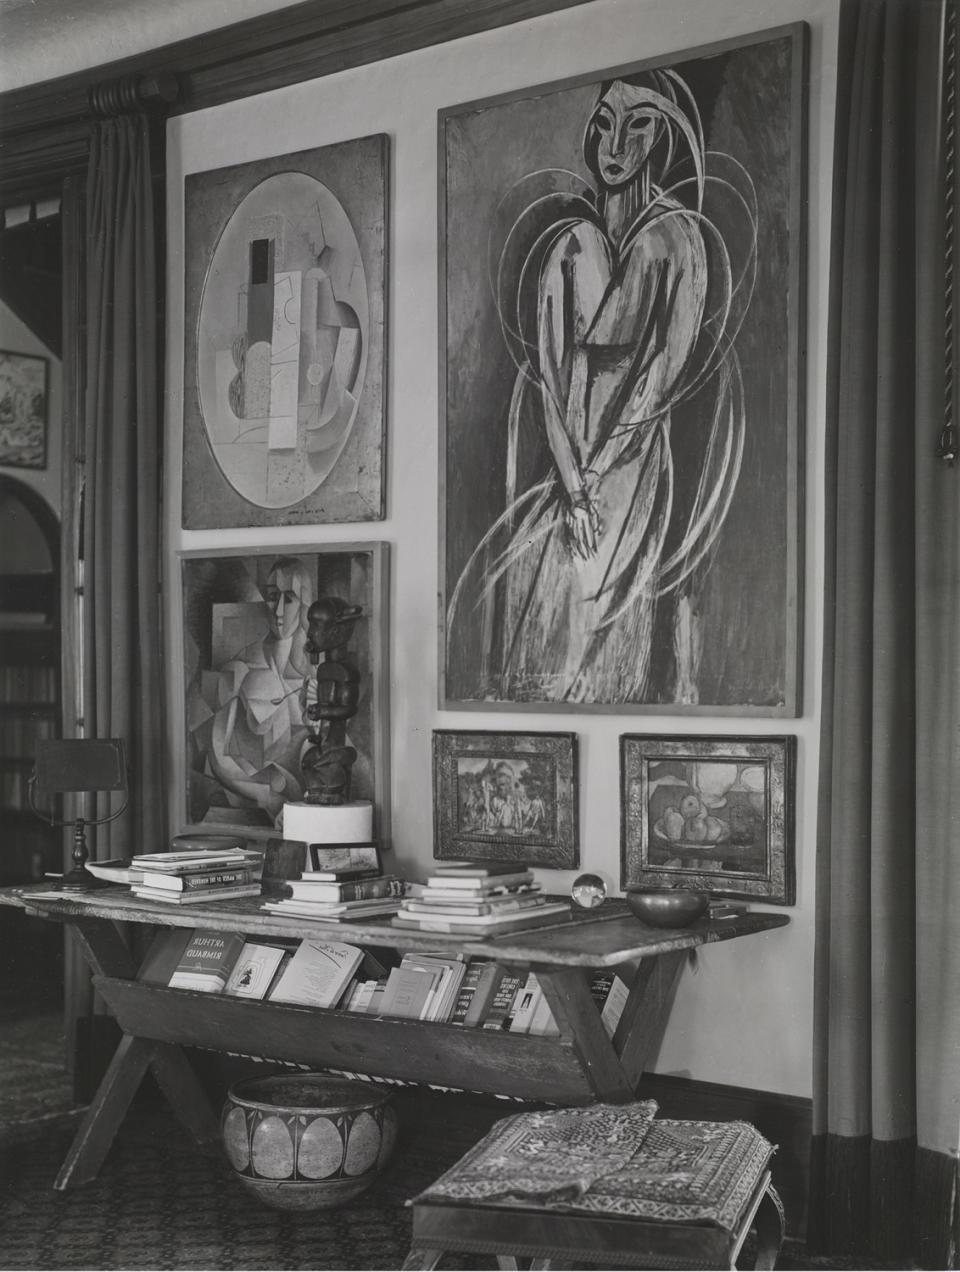 A 1912 Picasso Cubist still life hangs next to a 1913-14 Matisse portrait in the Arensbergs' living room.